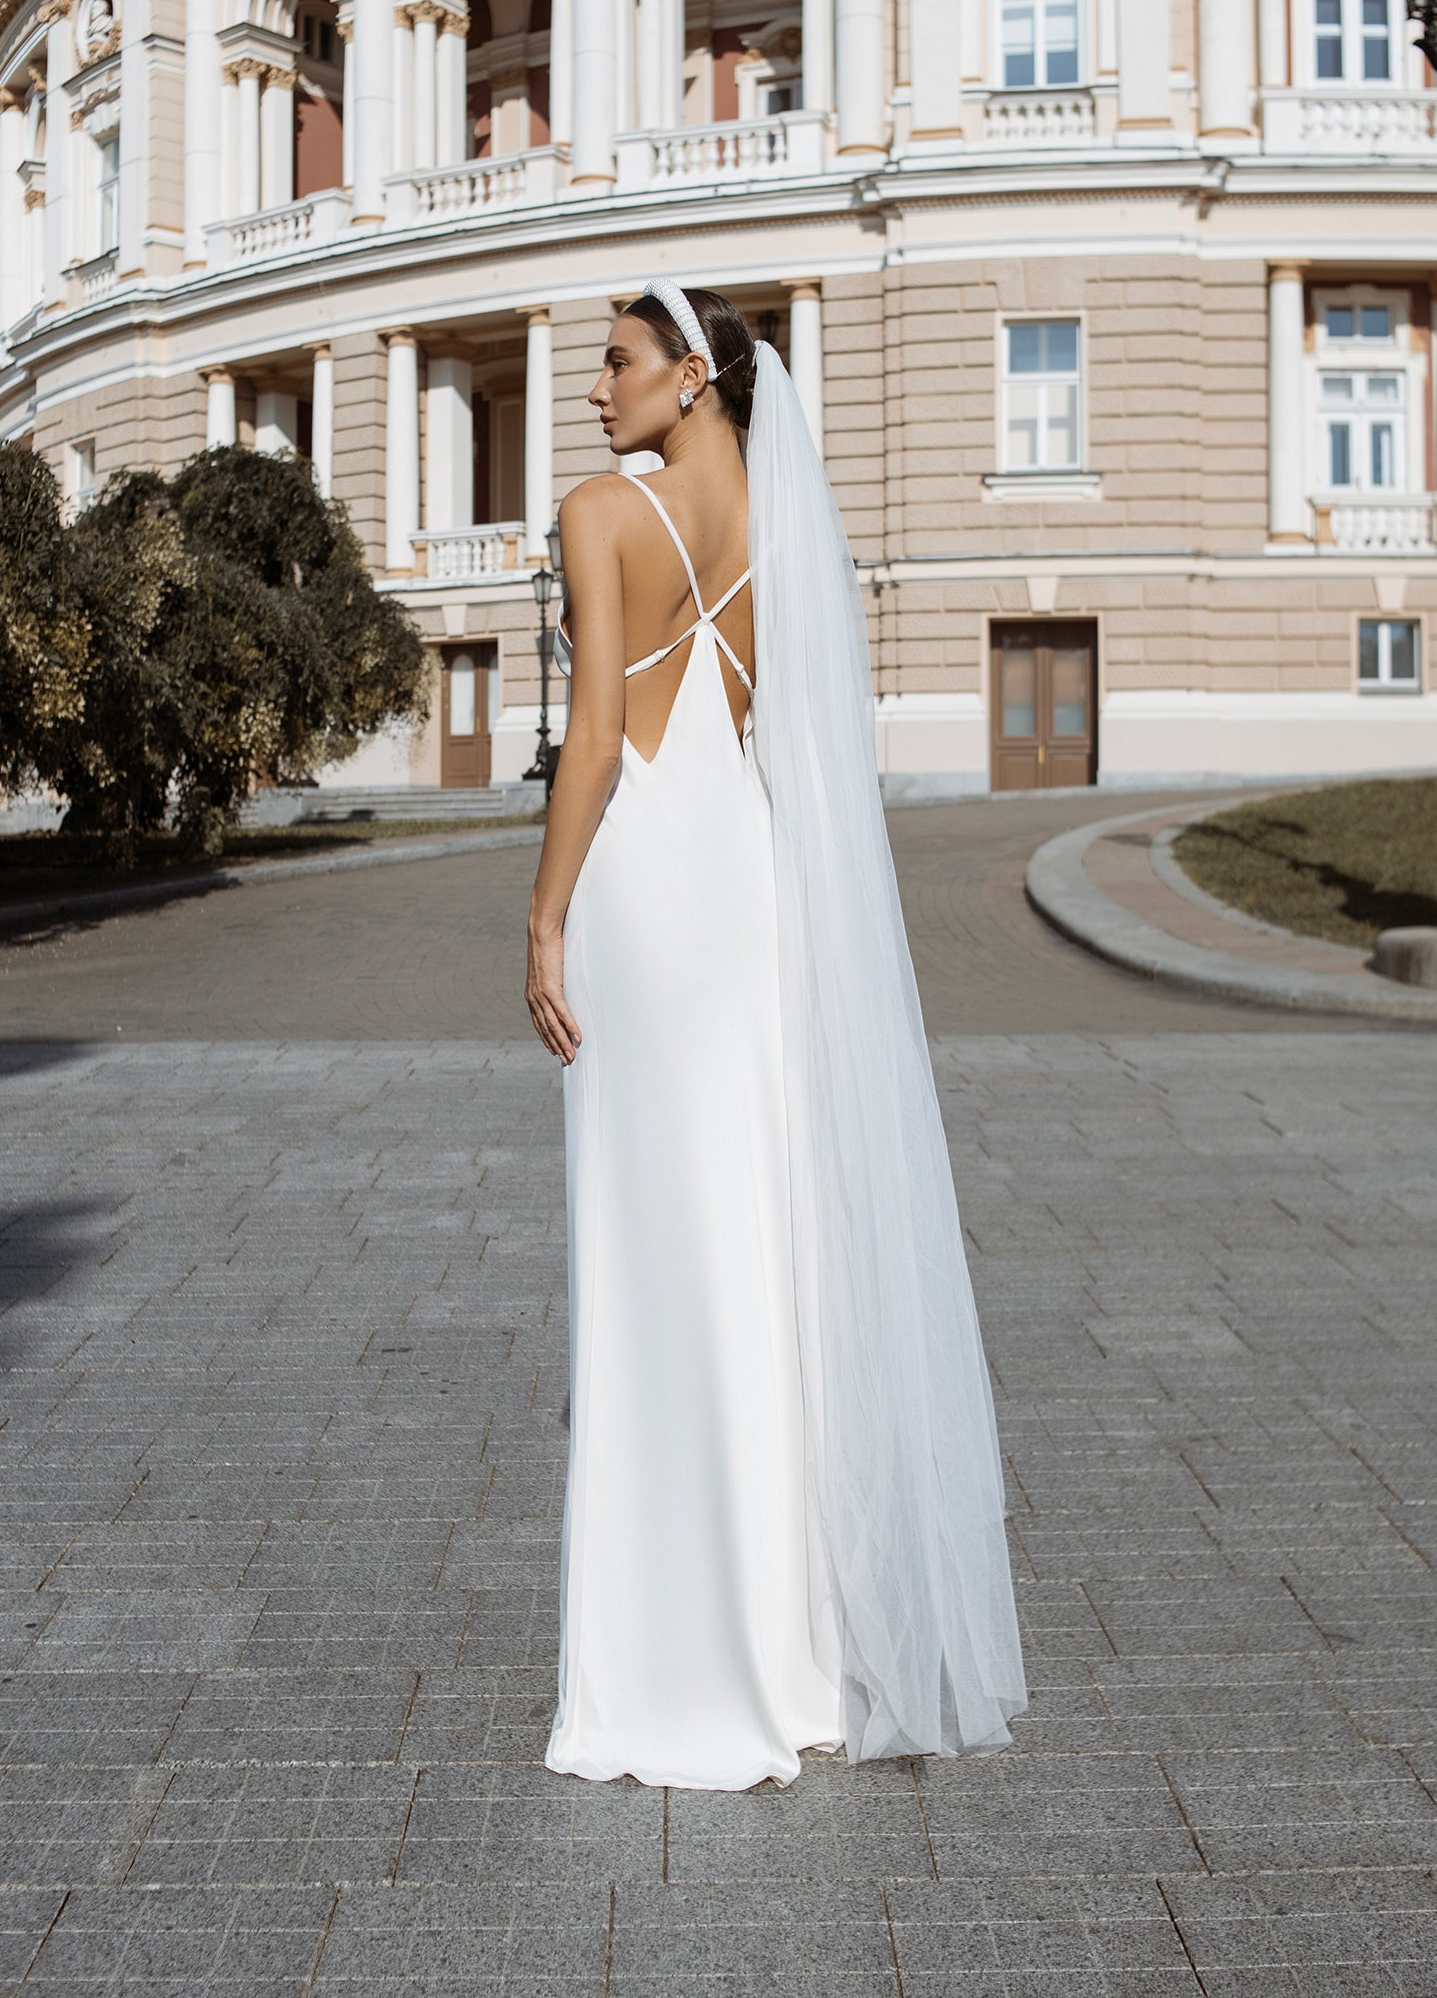 a woman in a white wedding dress is standing outside